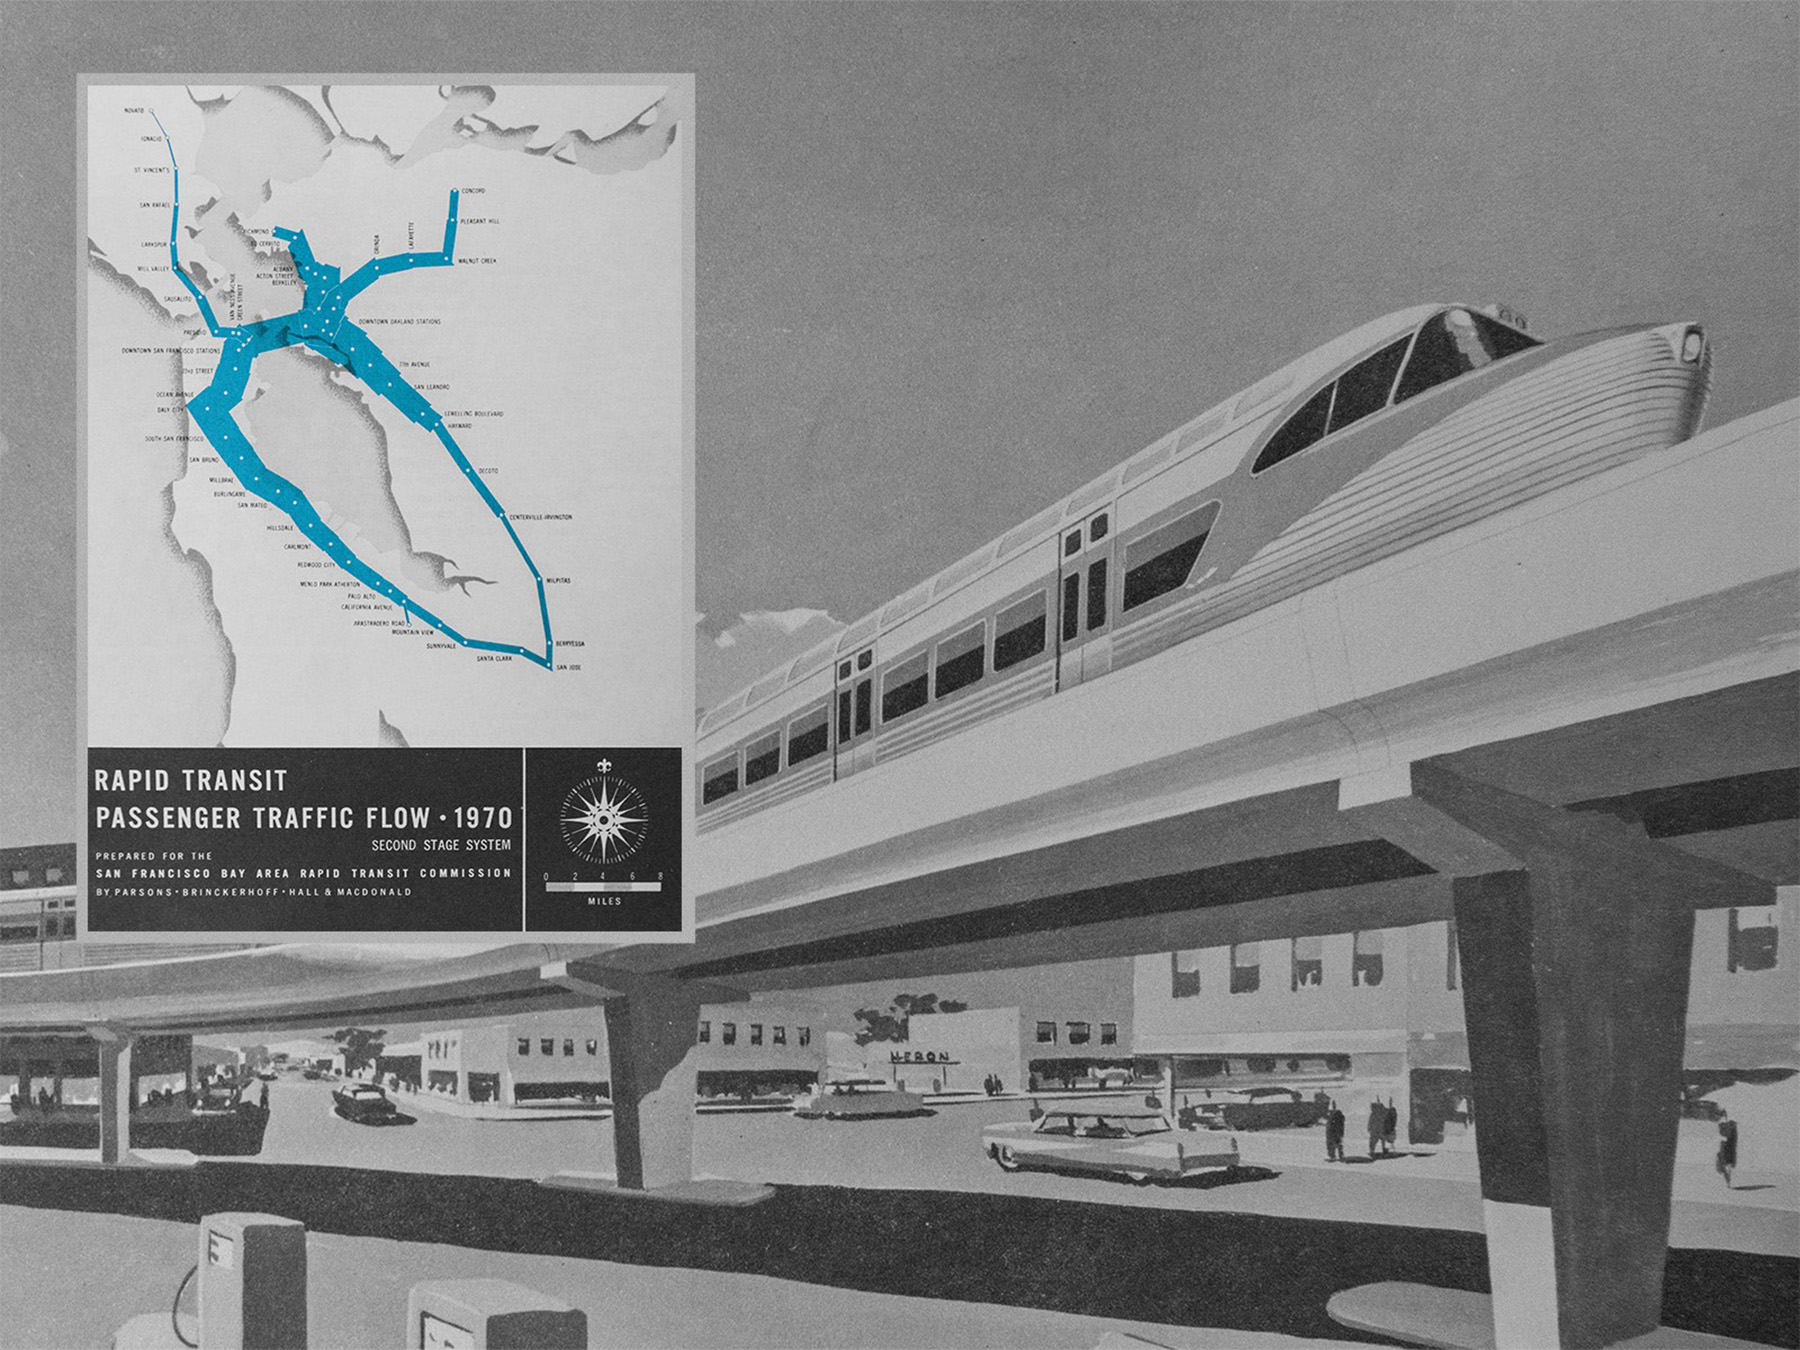 Black and white image shows a train on a raised track. There is a map showing transit stations on the left.